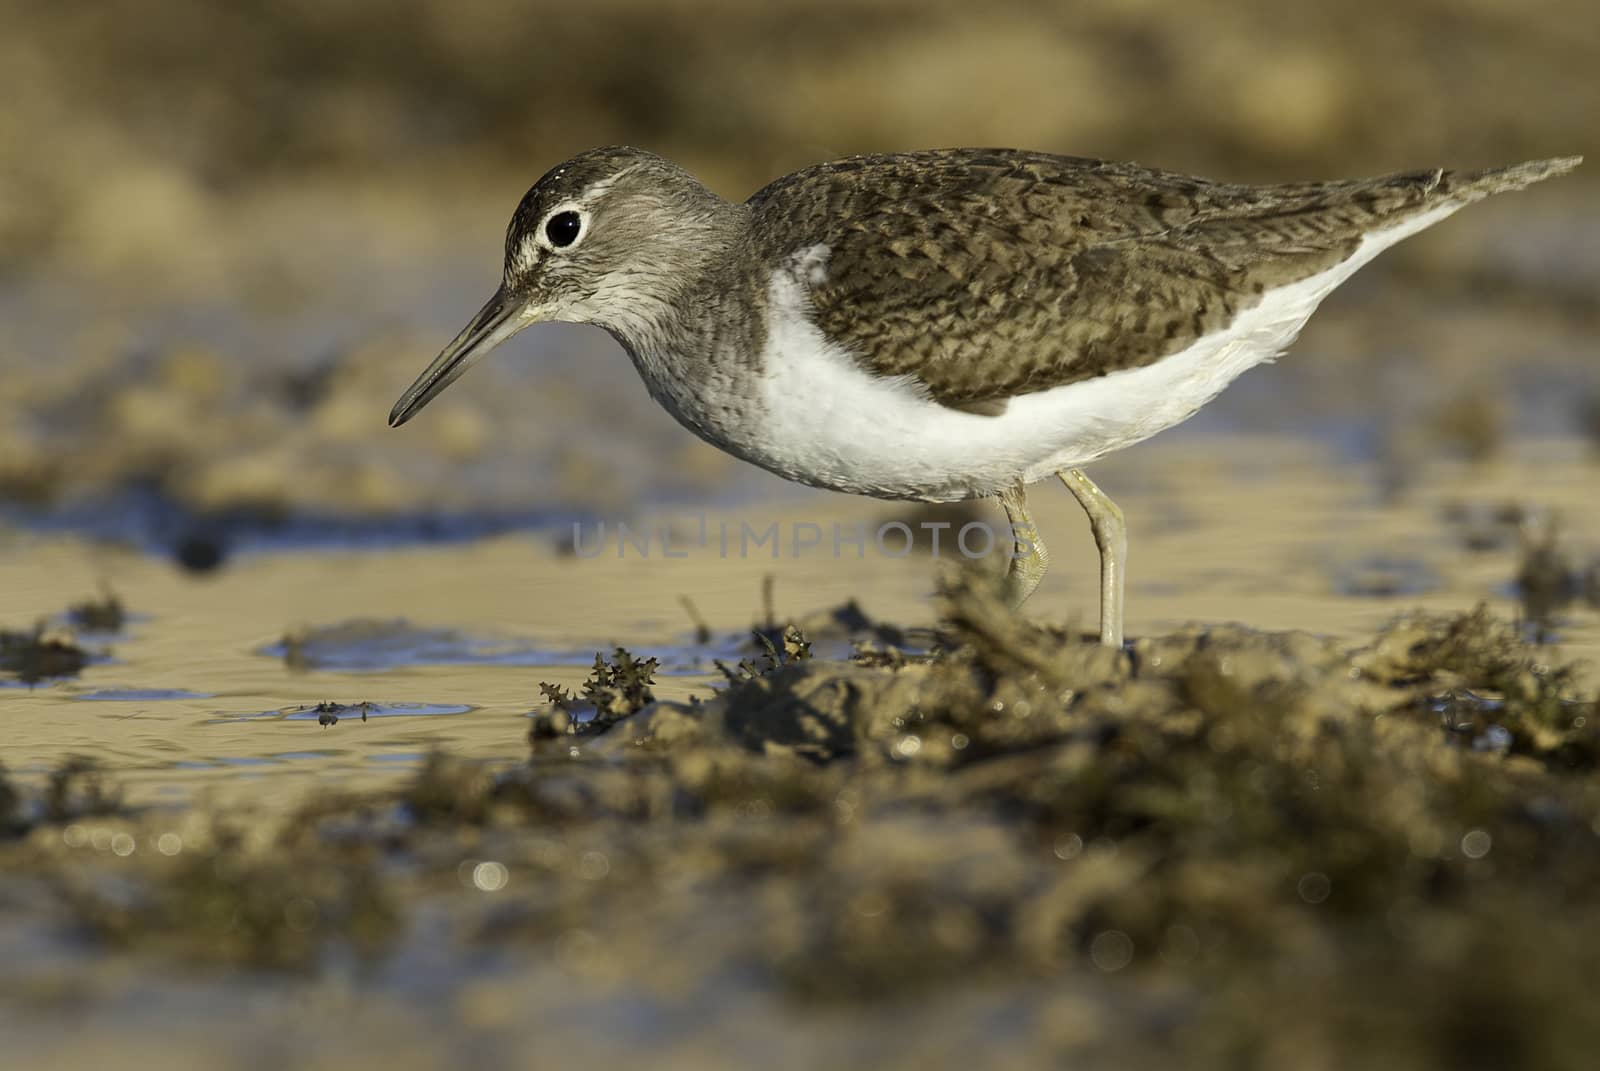 Common sandpiper - Actitis hypoleucos Looking for food in the wa by jalonsohu@gmail.com